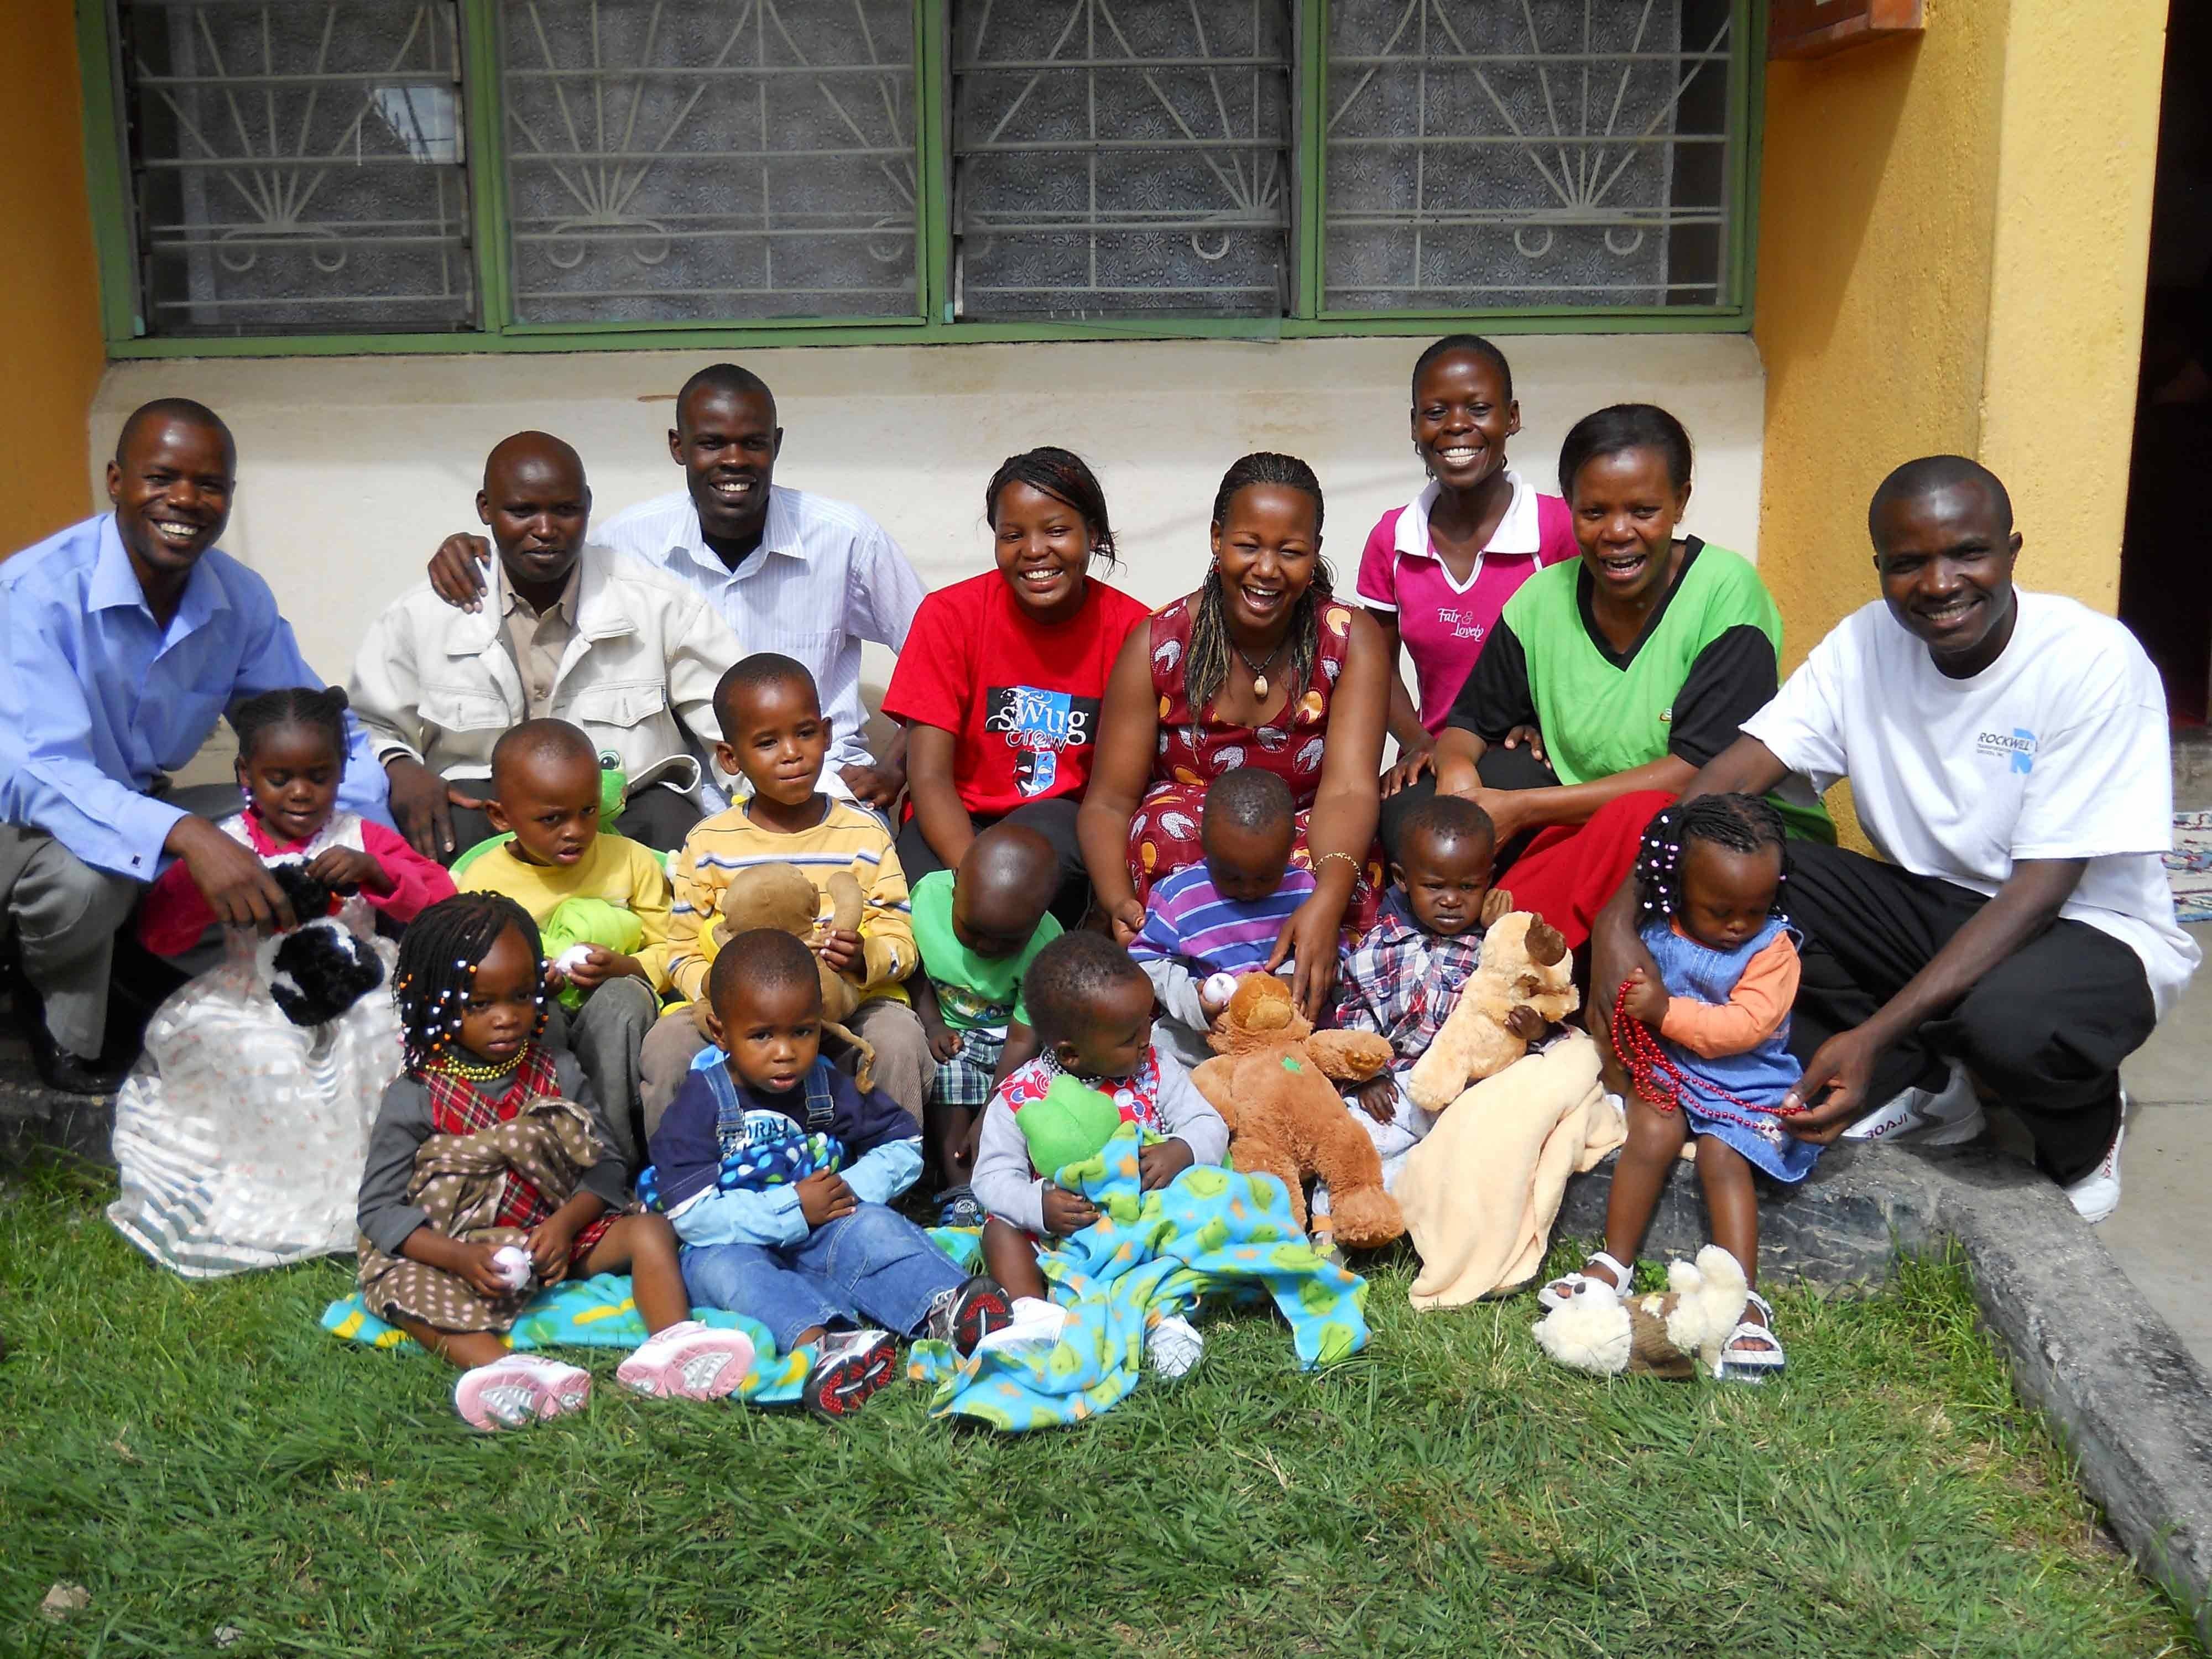 SAFE AT LAST- Pictured here are children and workers at the Home of Hope Kenya Dream Centre. The facility was spearheaded through Red Deer’s Word of Life Centre earlier this year in an effort to rescue abandoned children in the poverty-wracked region.